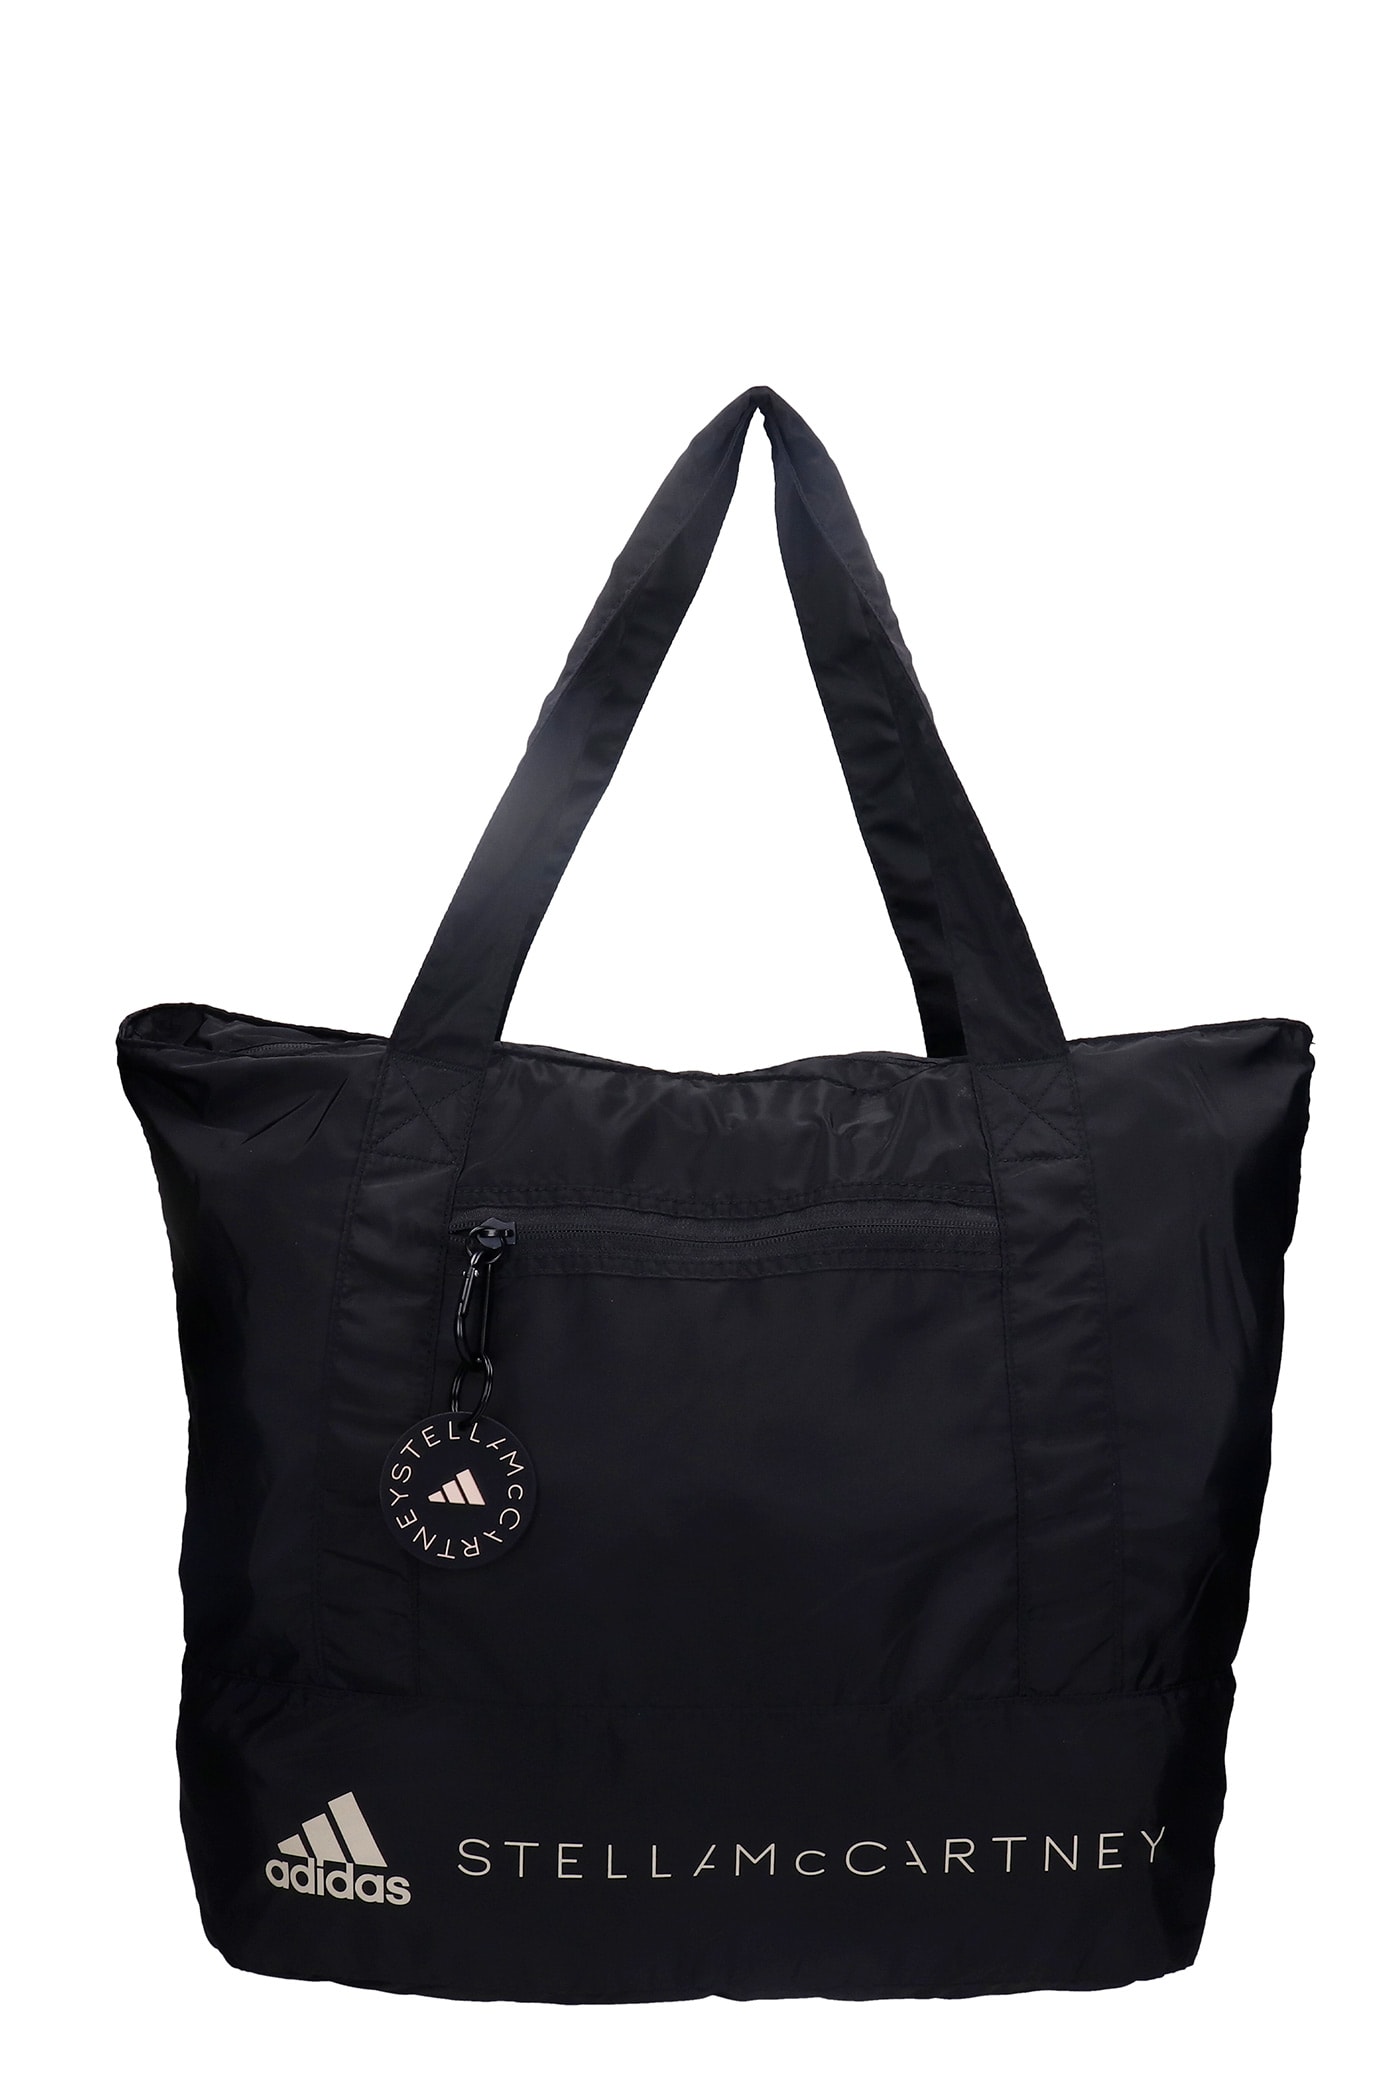 ADIDAS BY STELLA MCCARTNEY TOTE IN BLACK SYNTHETIC FIBERS,GL5449